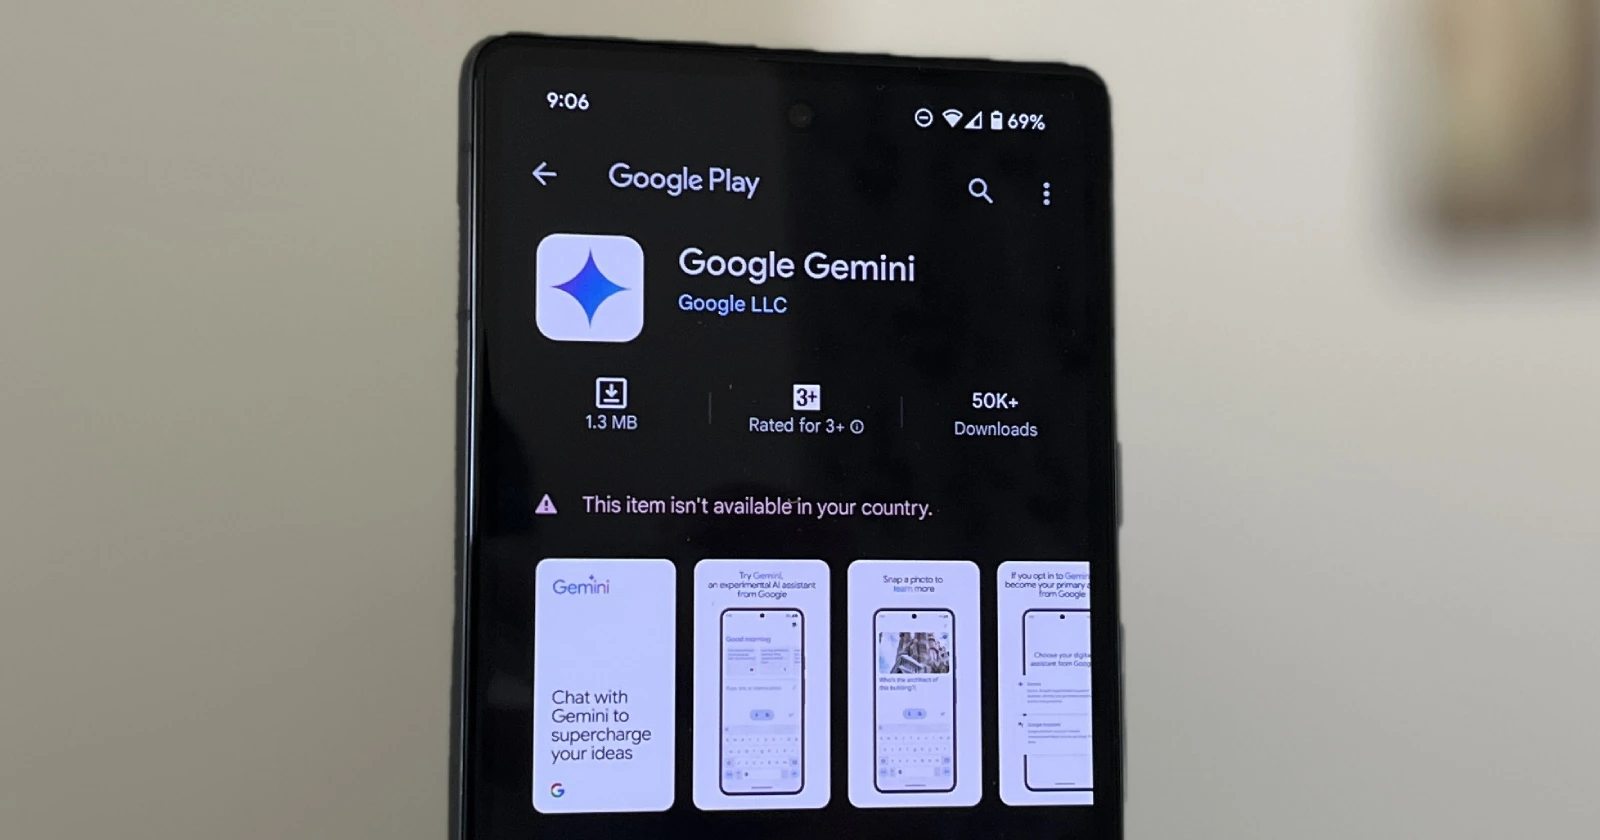 Google's Gemini app is coming to India next week for Pixel & other Android devices